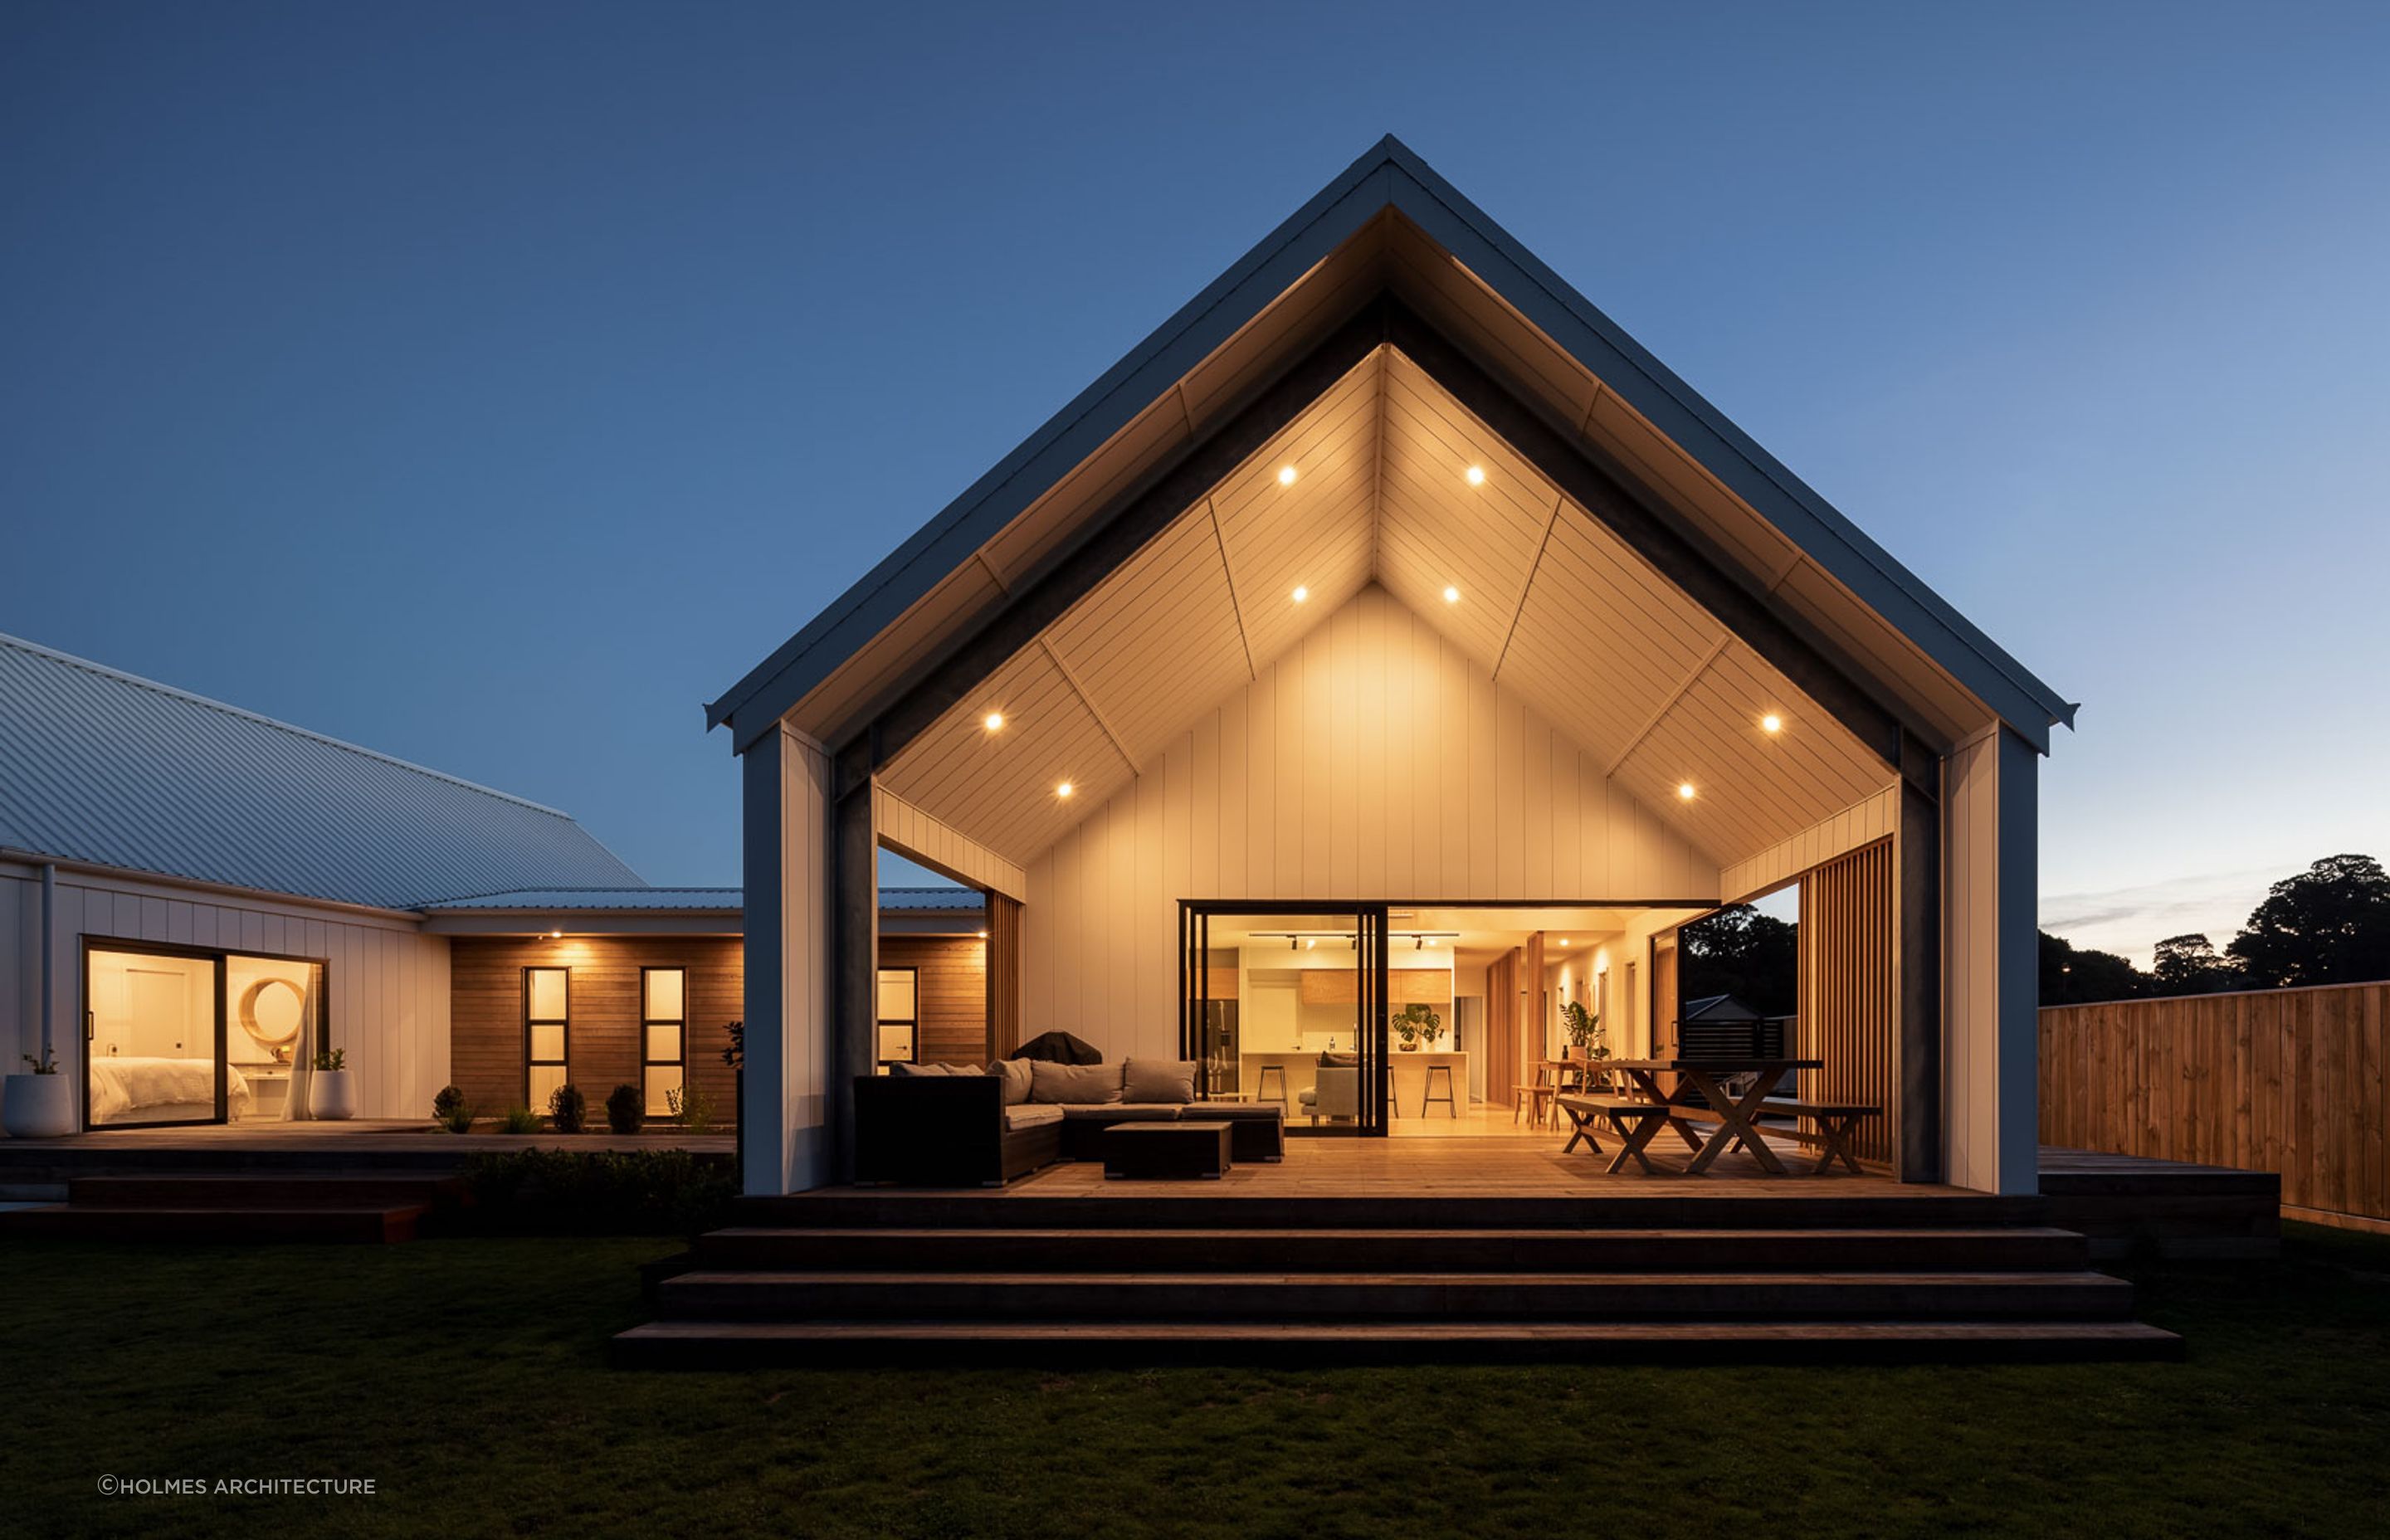 The magnificence of the gabled pavilions and contrasting use of weatherboards can still be appreciated at dusk with its excellent outdoor lighting design. | Photography: André Vroon Photographer